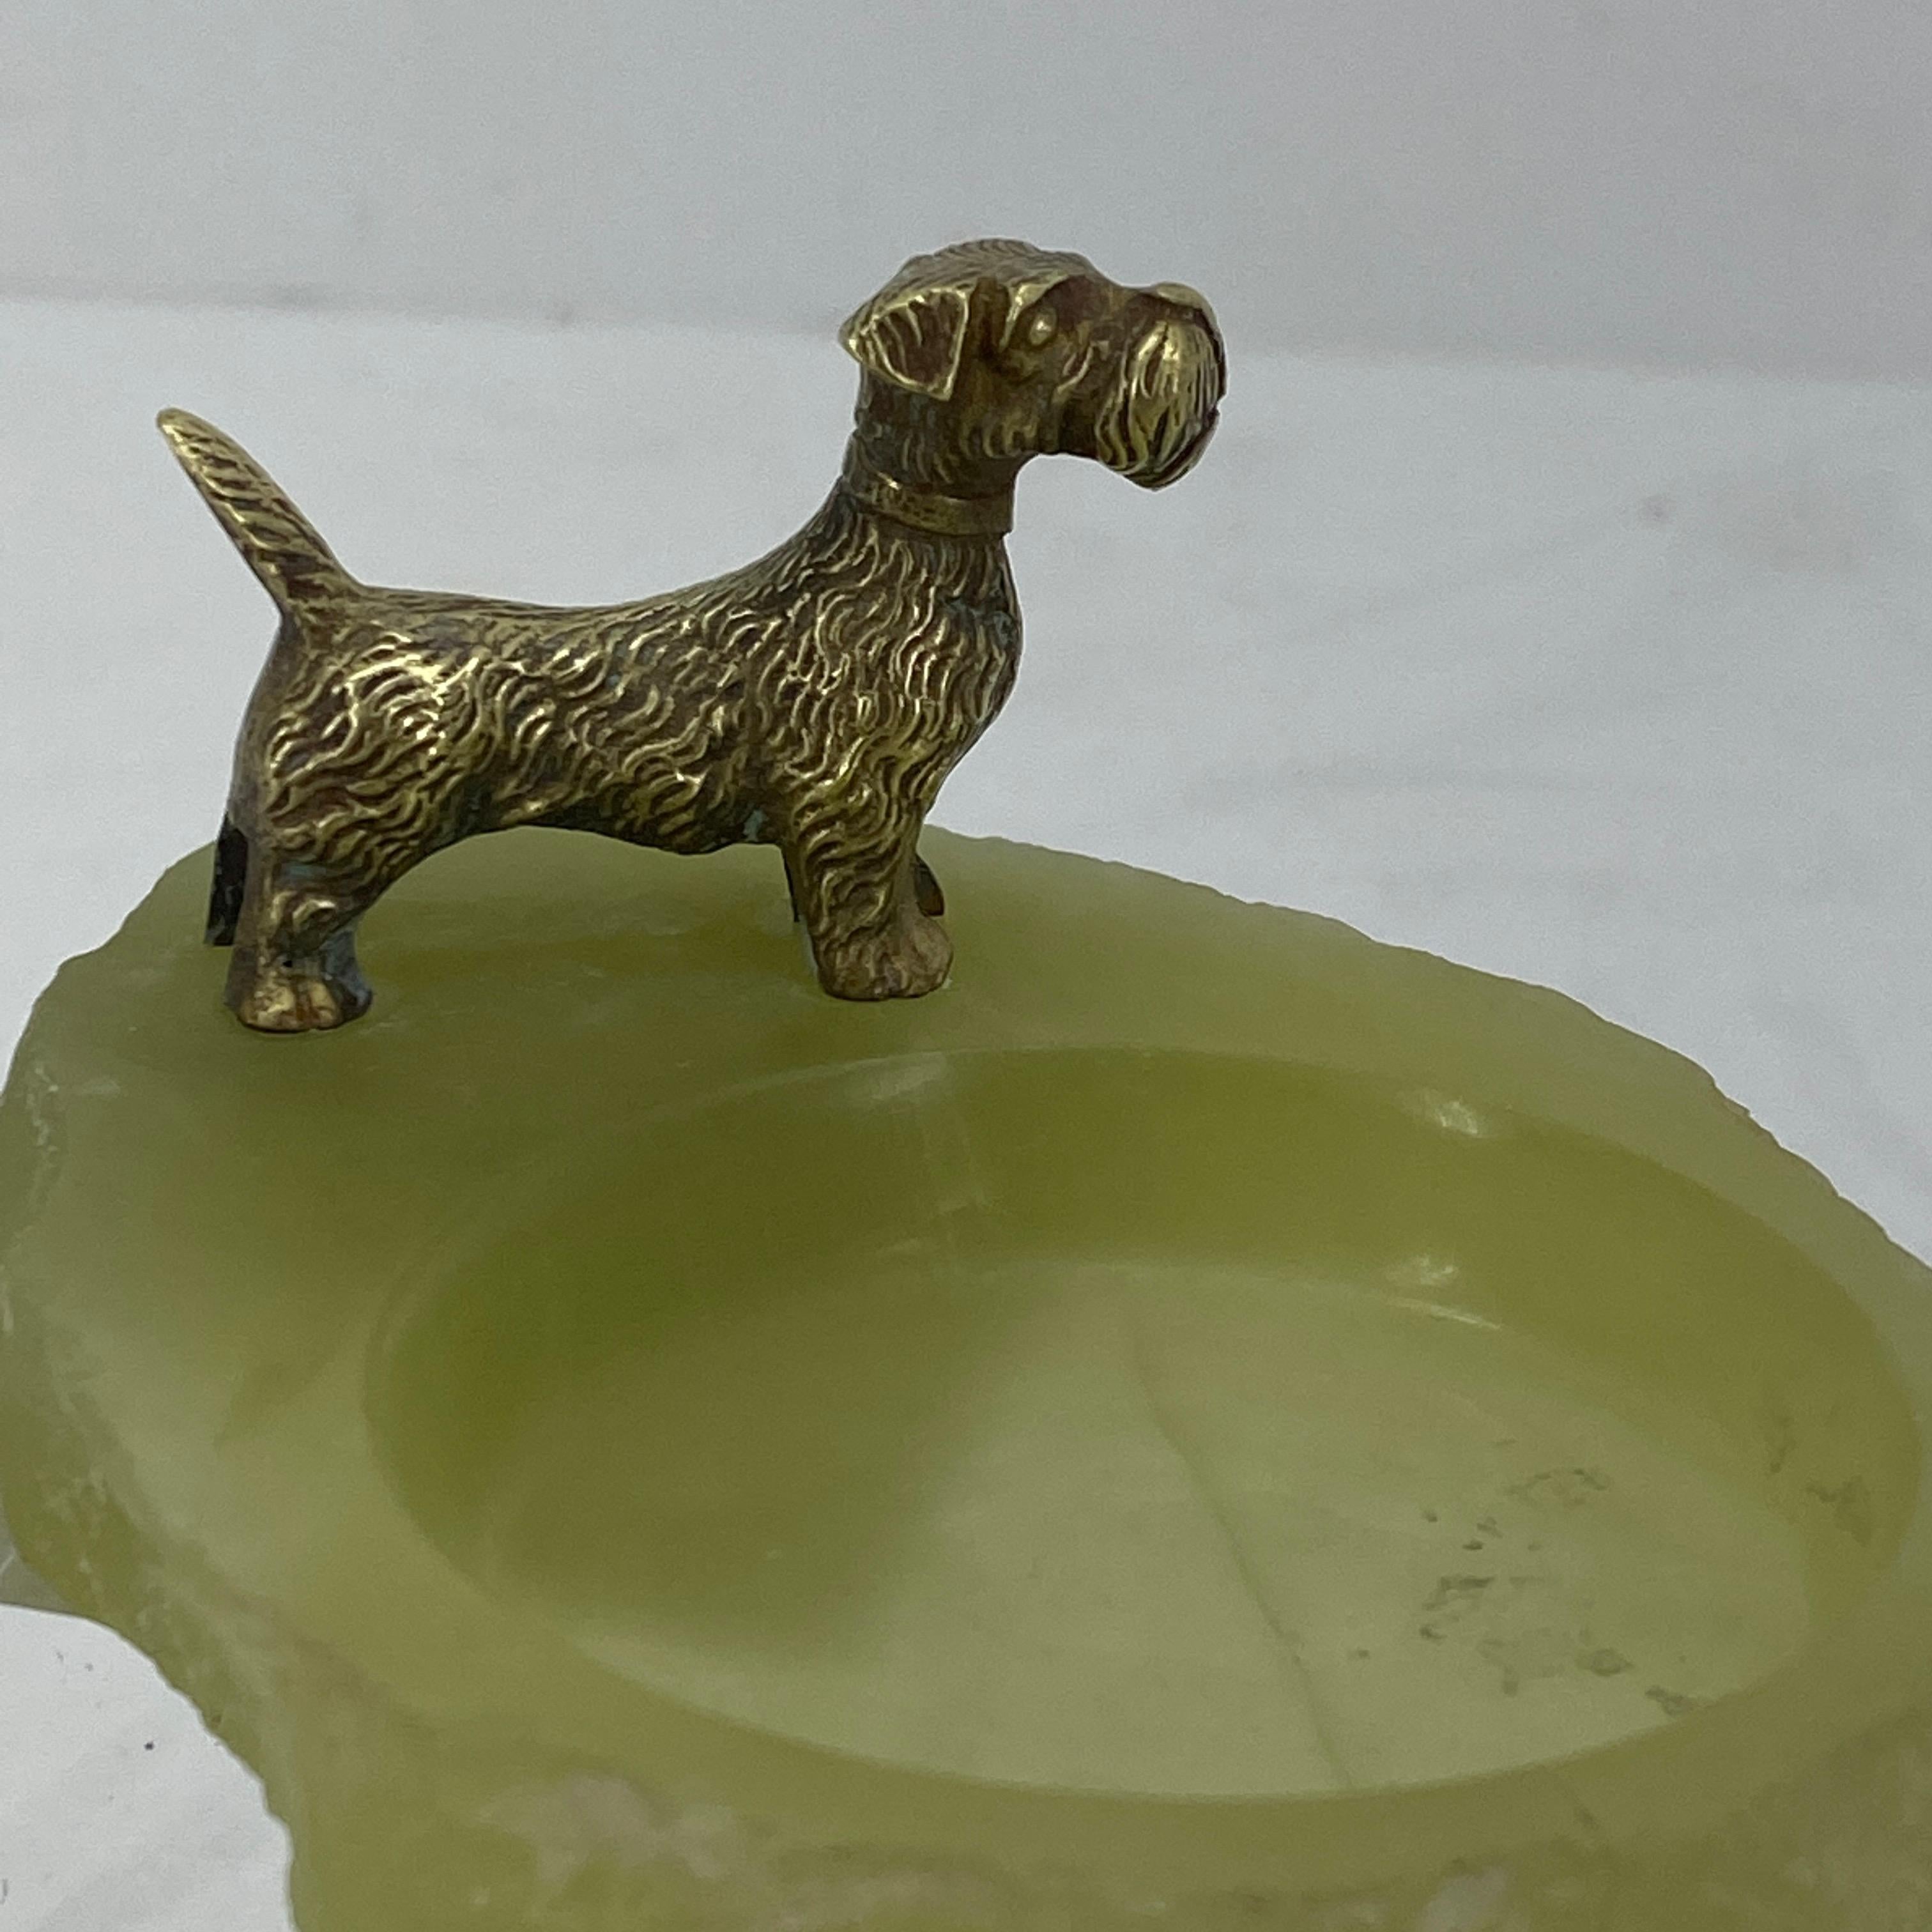 Pistachio Green Onyx and Bronze Terrier Ashtray or Jewelry Tray 8